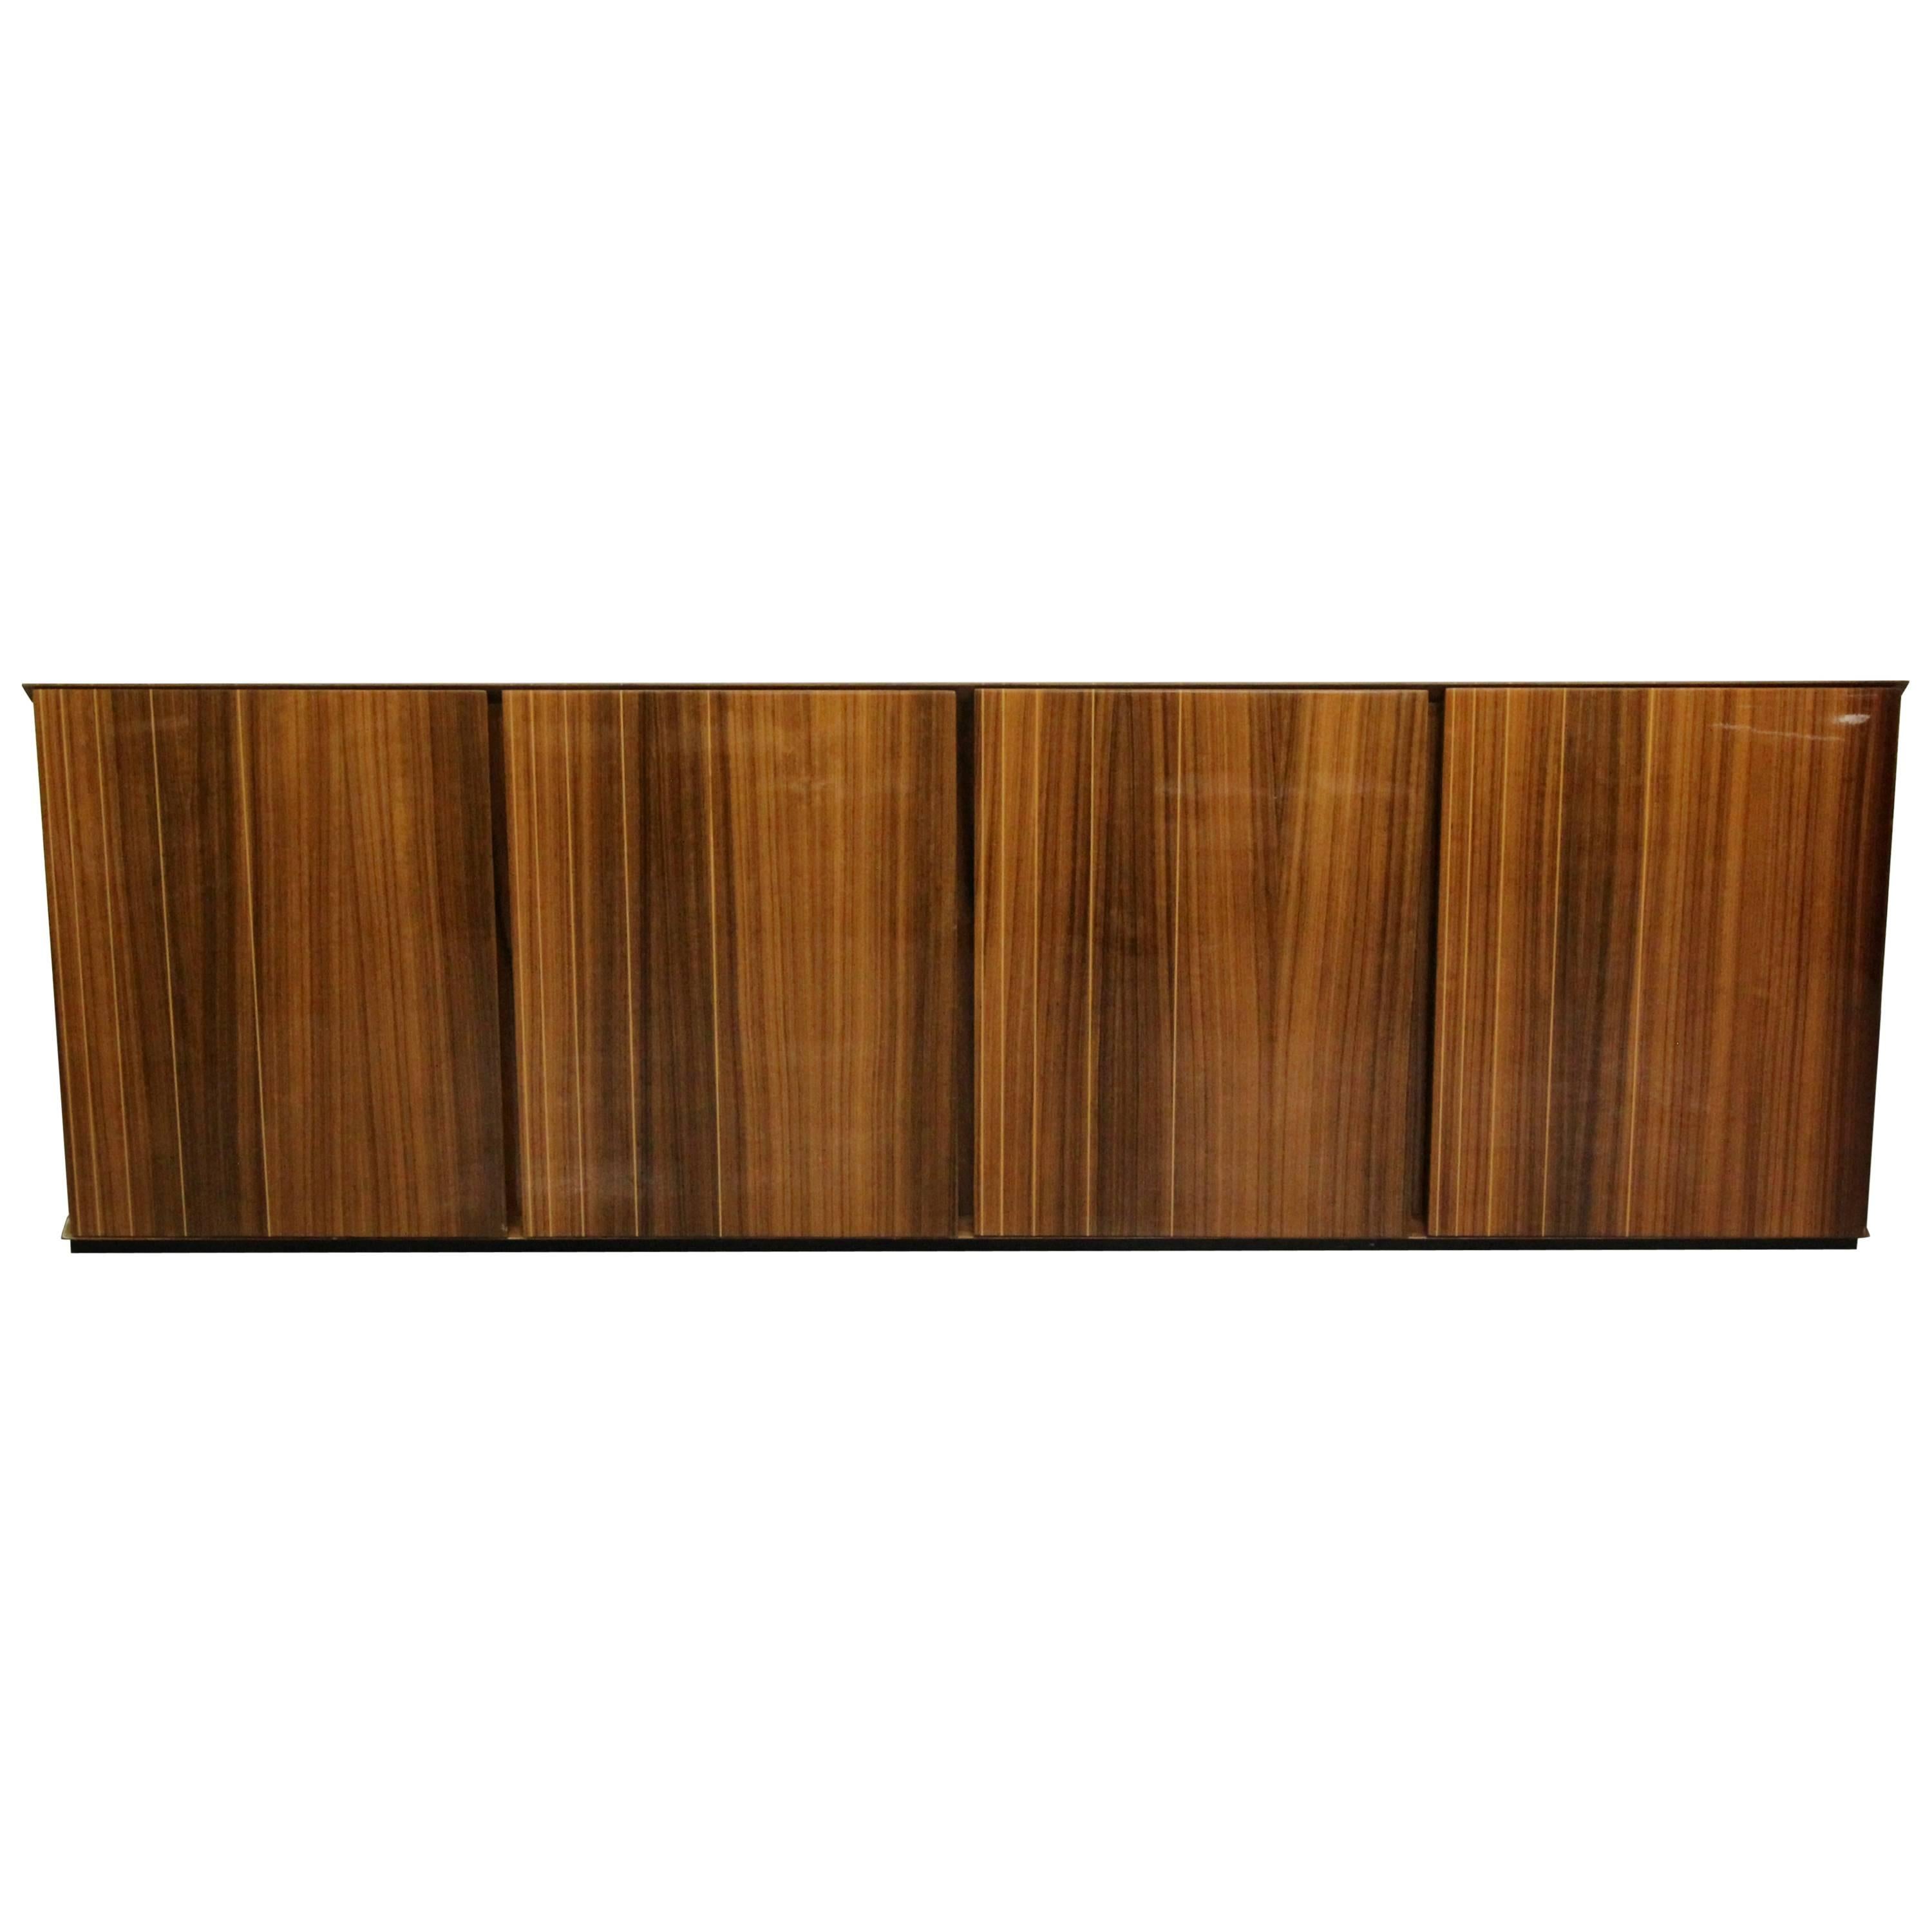 Monumental Italian Lacquered Zebrawood Credenza Buffet